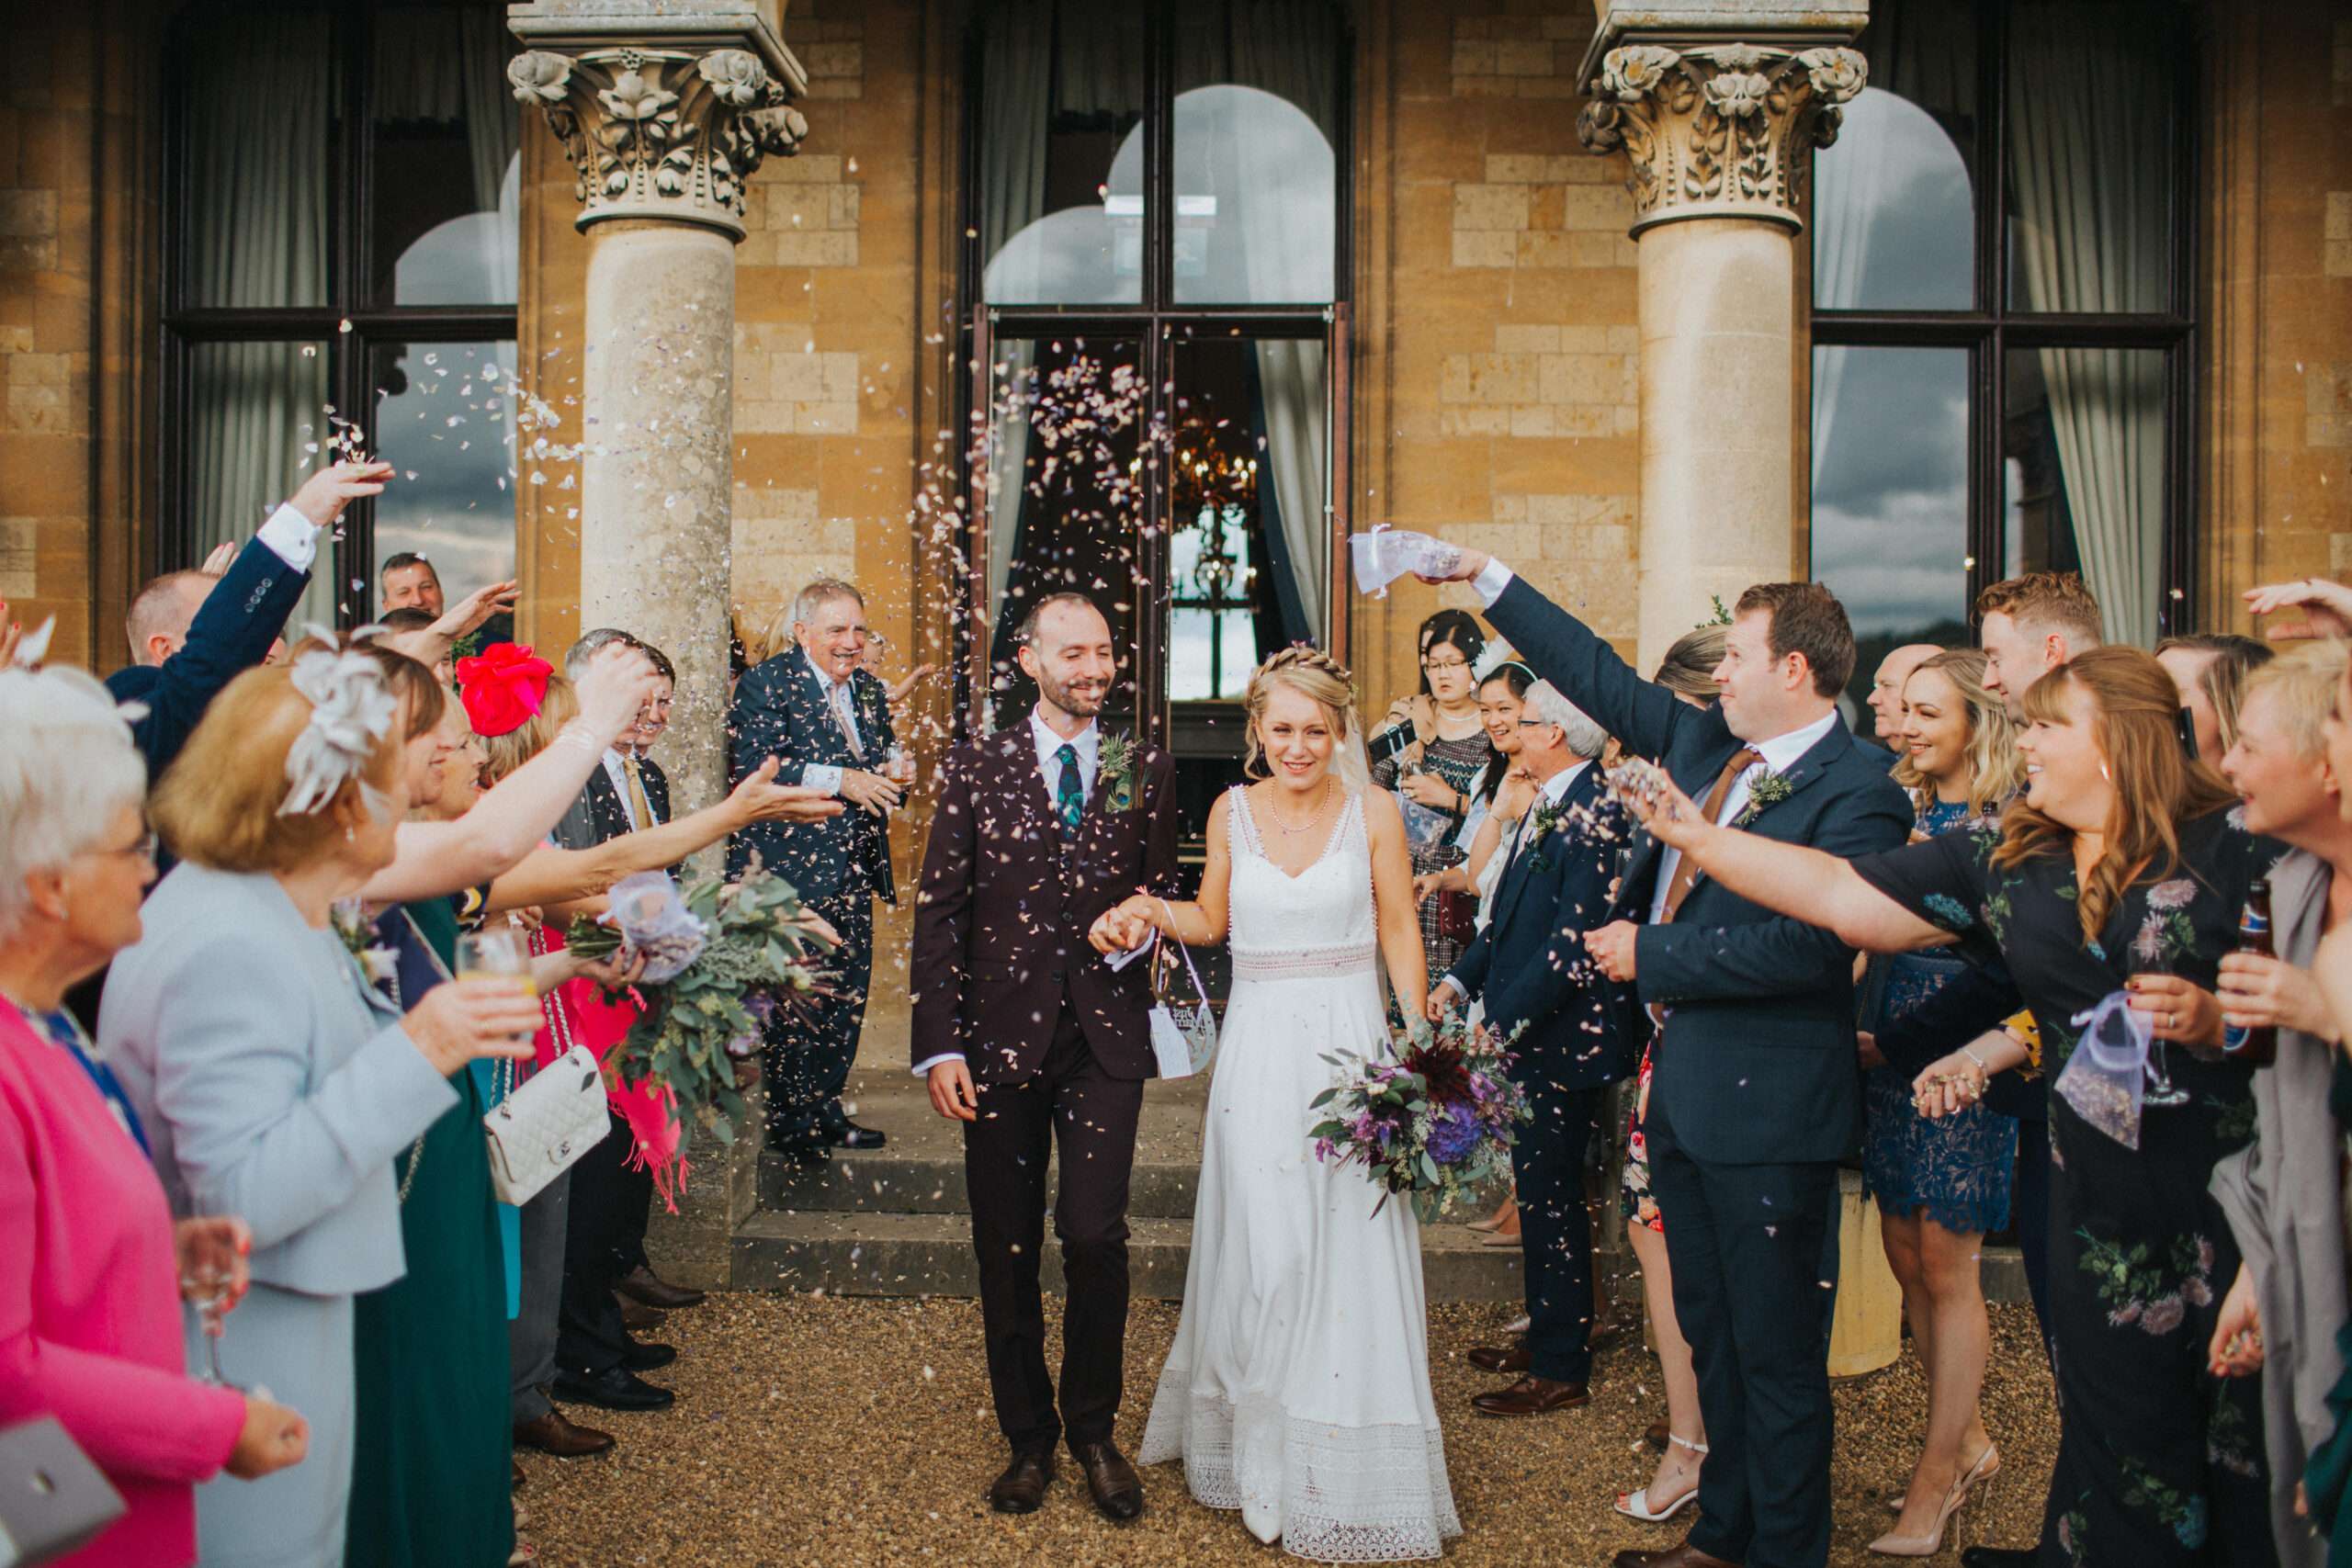 Walton Hall's Warwickshire backdrop for personalized vows